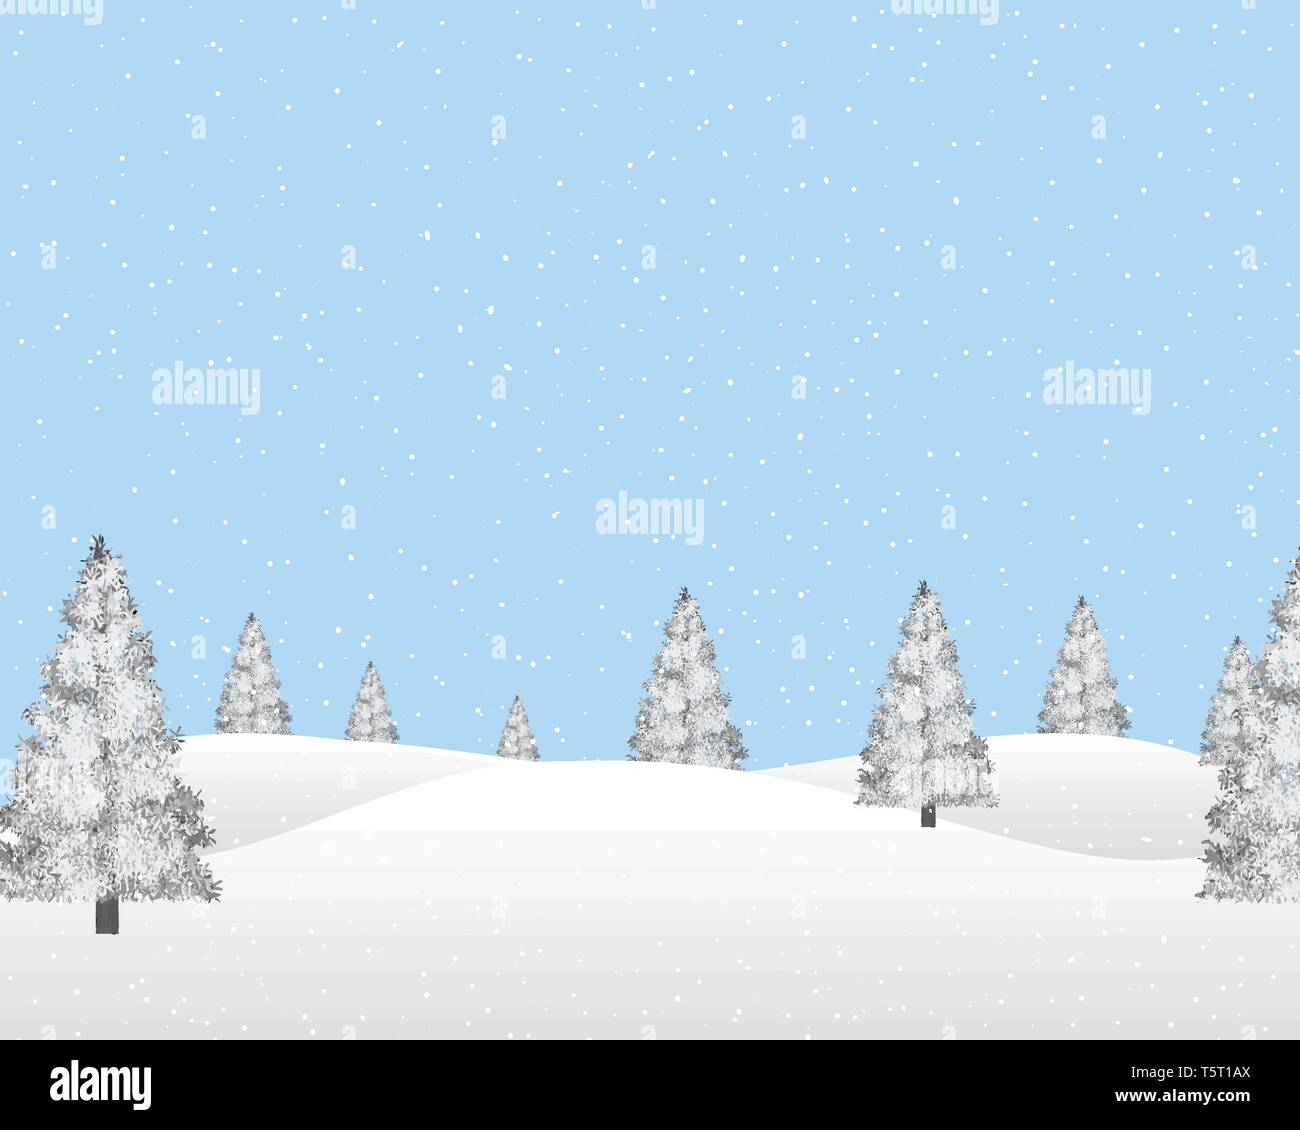 Winter landscape with snowy pine trees. Stock Vector